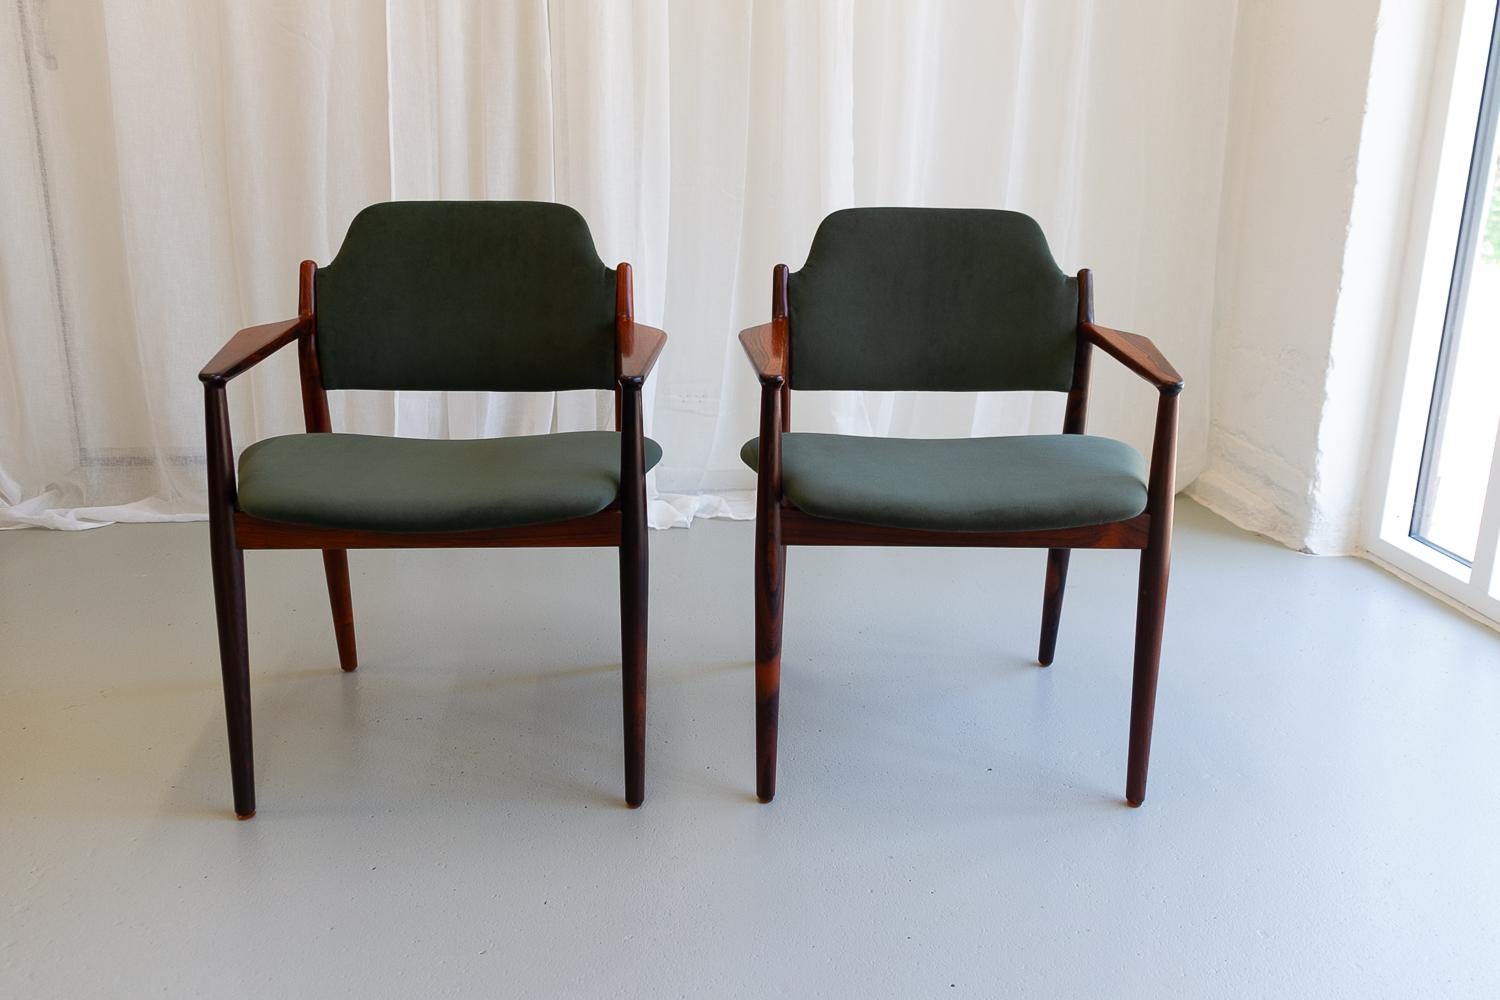 Mid-20th Century Danish Modern Rosewood Armchairs Model 62A by Arne Vodder, 1960s. Set of 2. For Sale